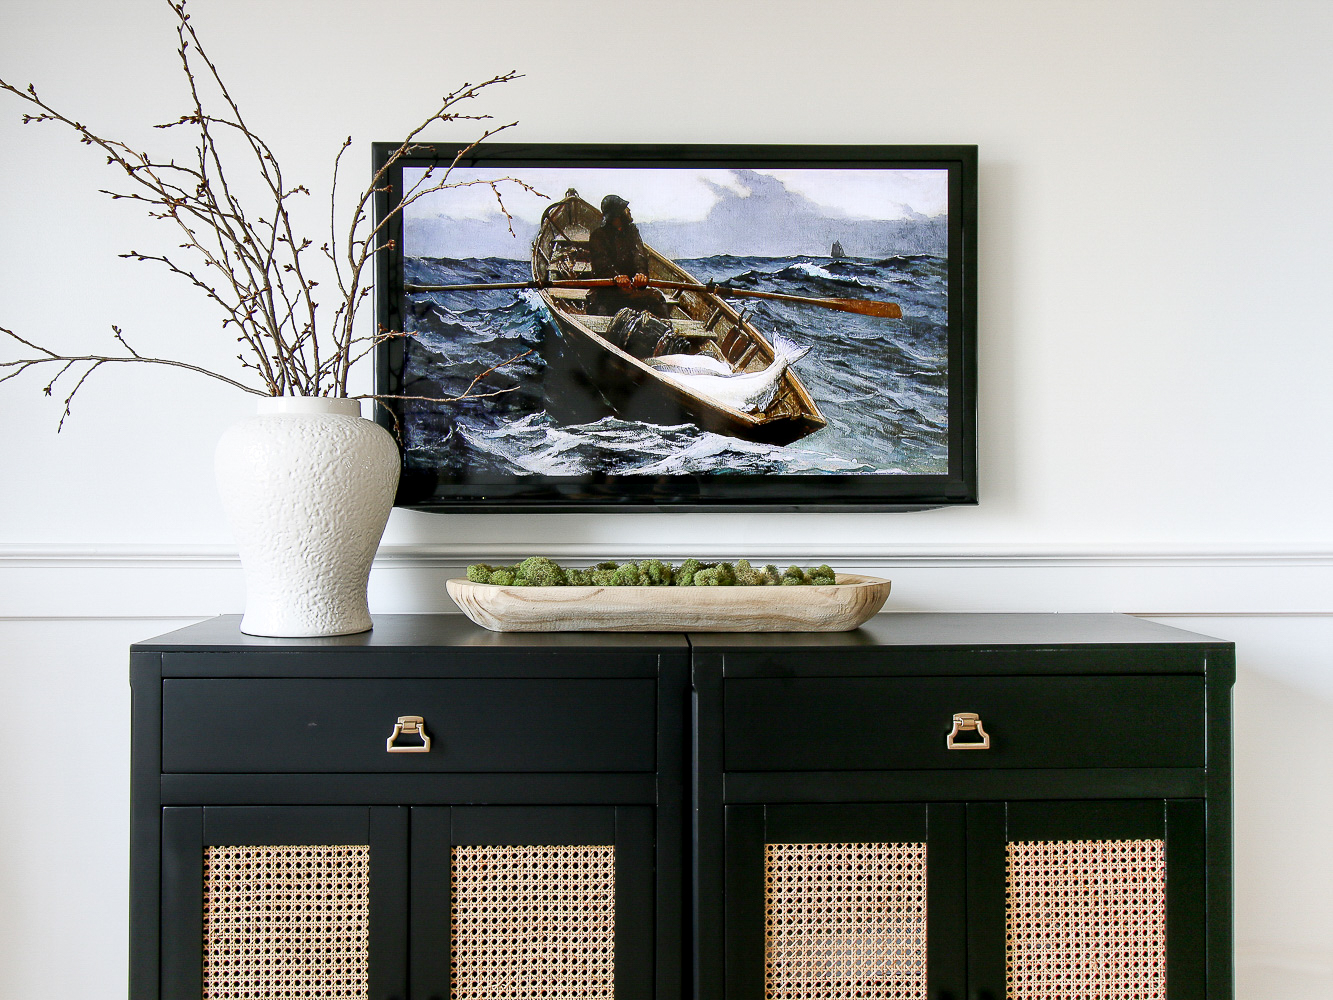 How to Hide TV Wires in Your Wall